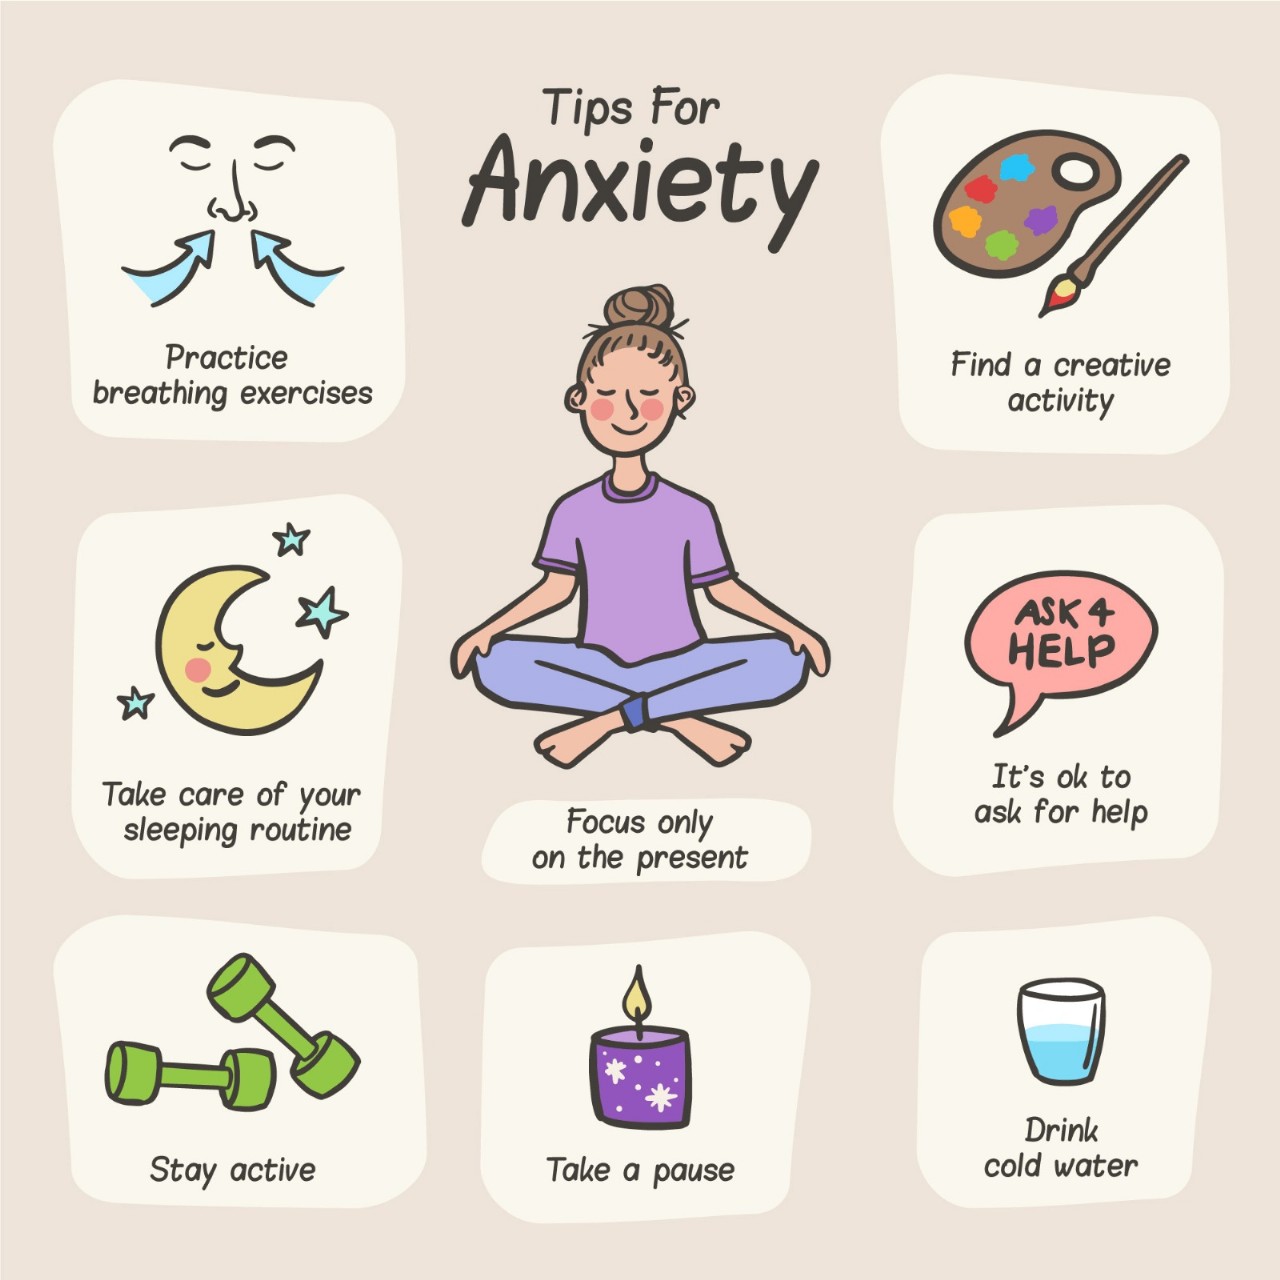 How can I manage stress and anxiety in my daily life?